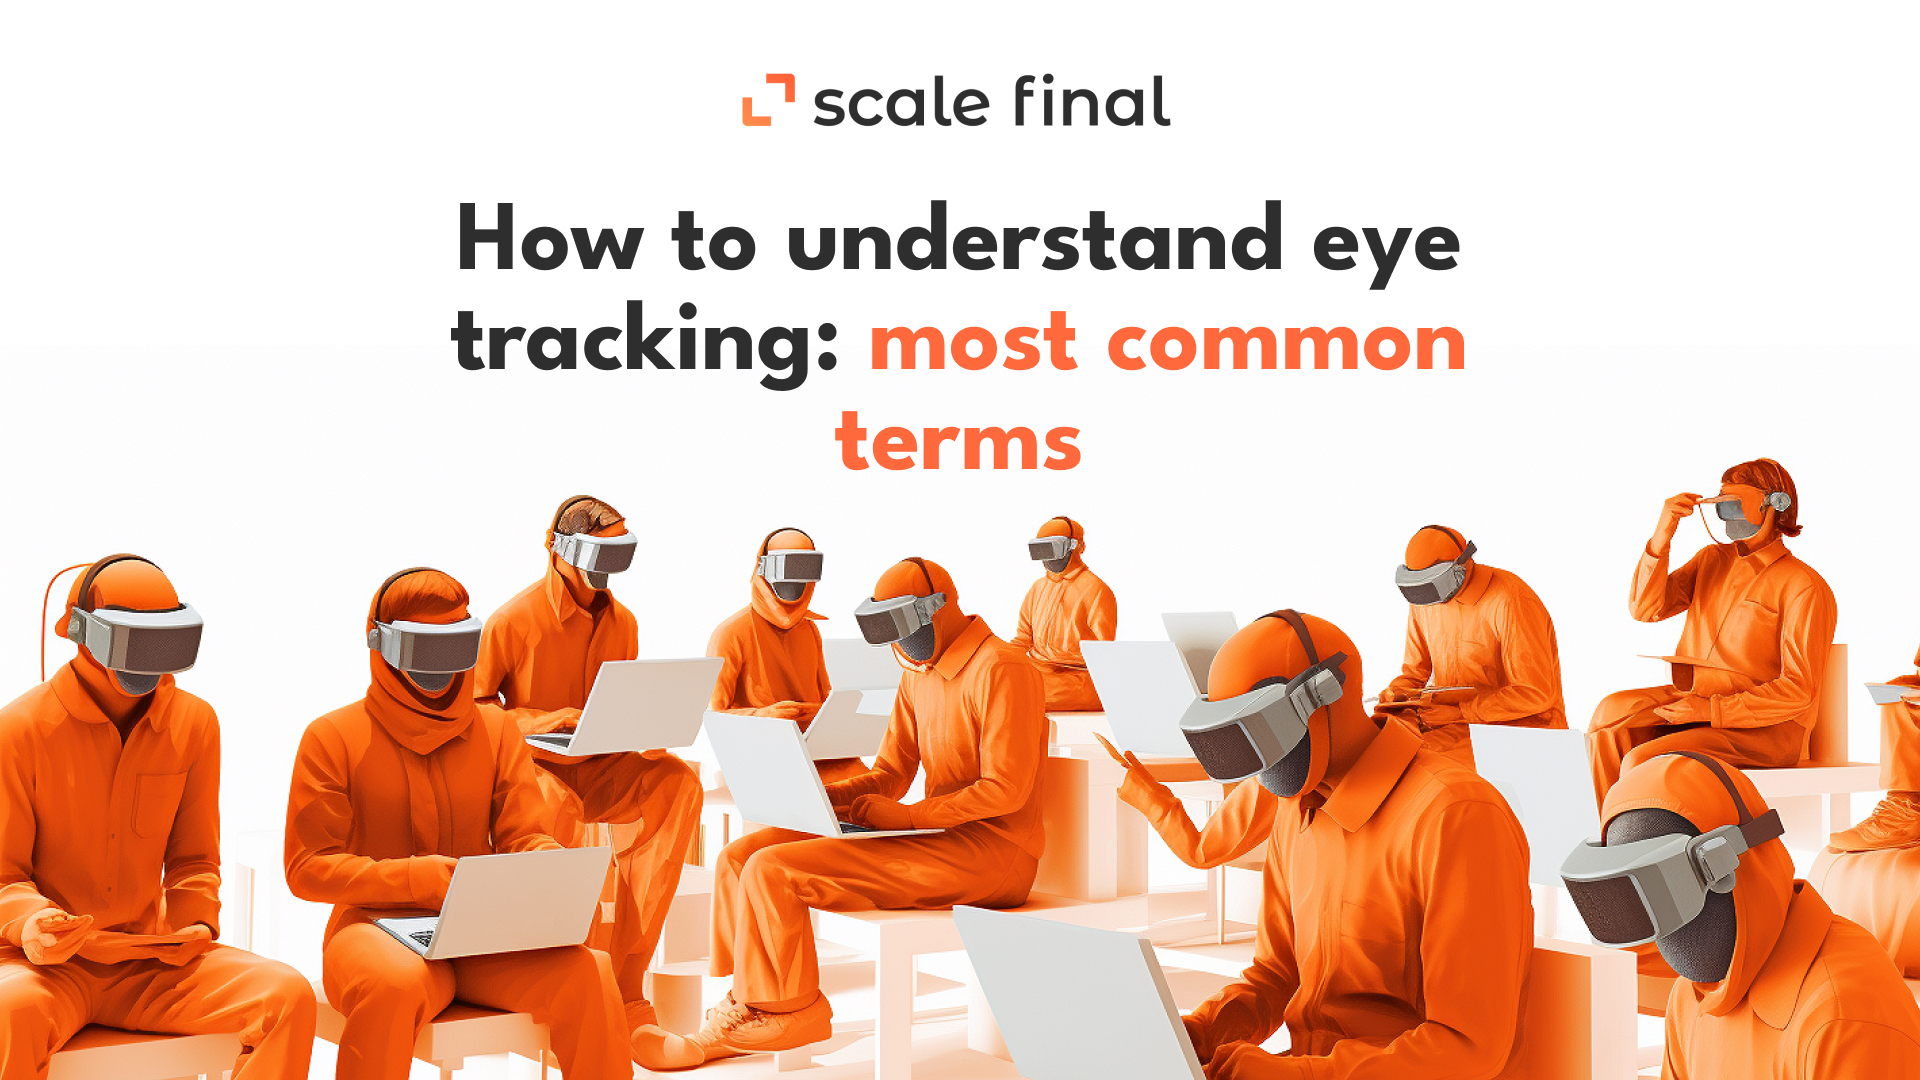 How to understand eye tracking: most common terms